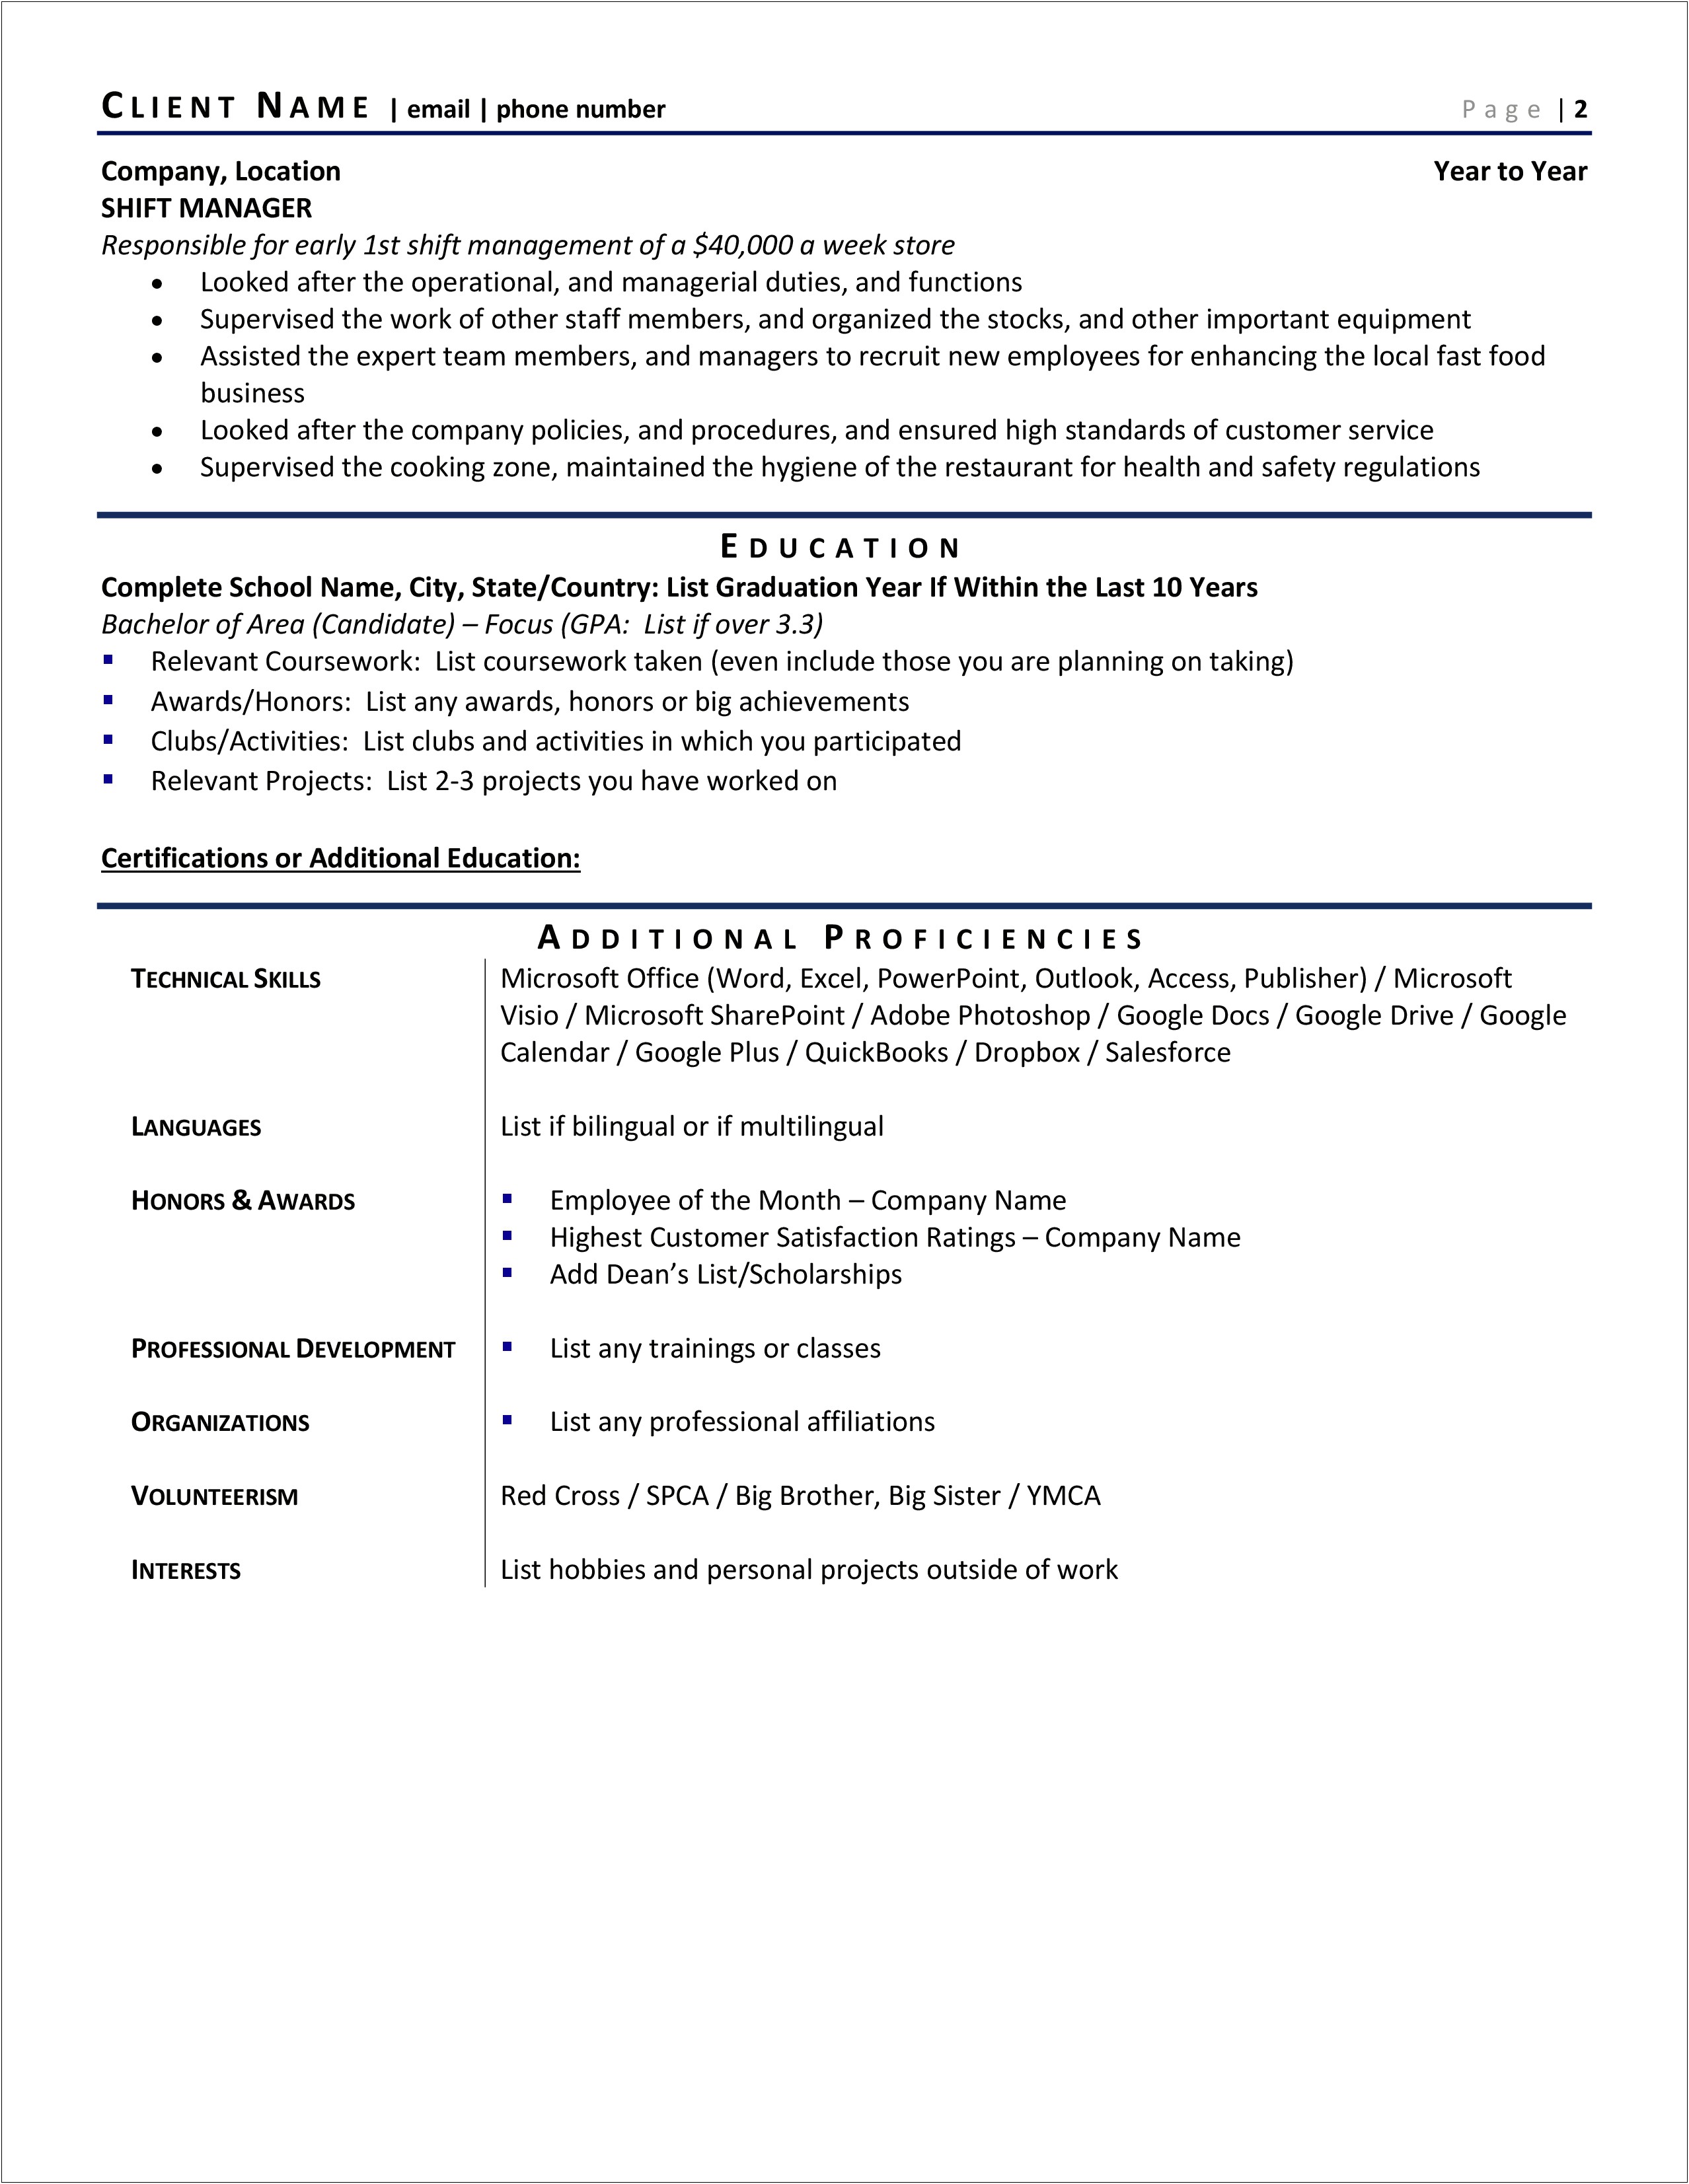 Leaving A Job Out Of Resume